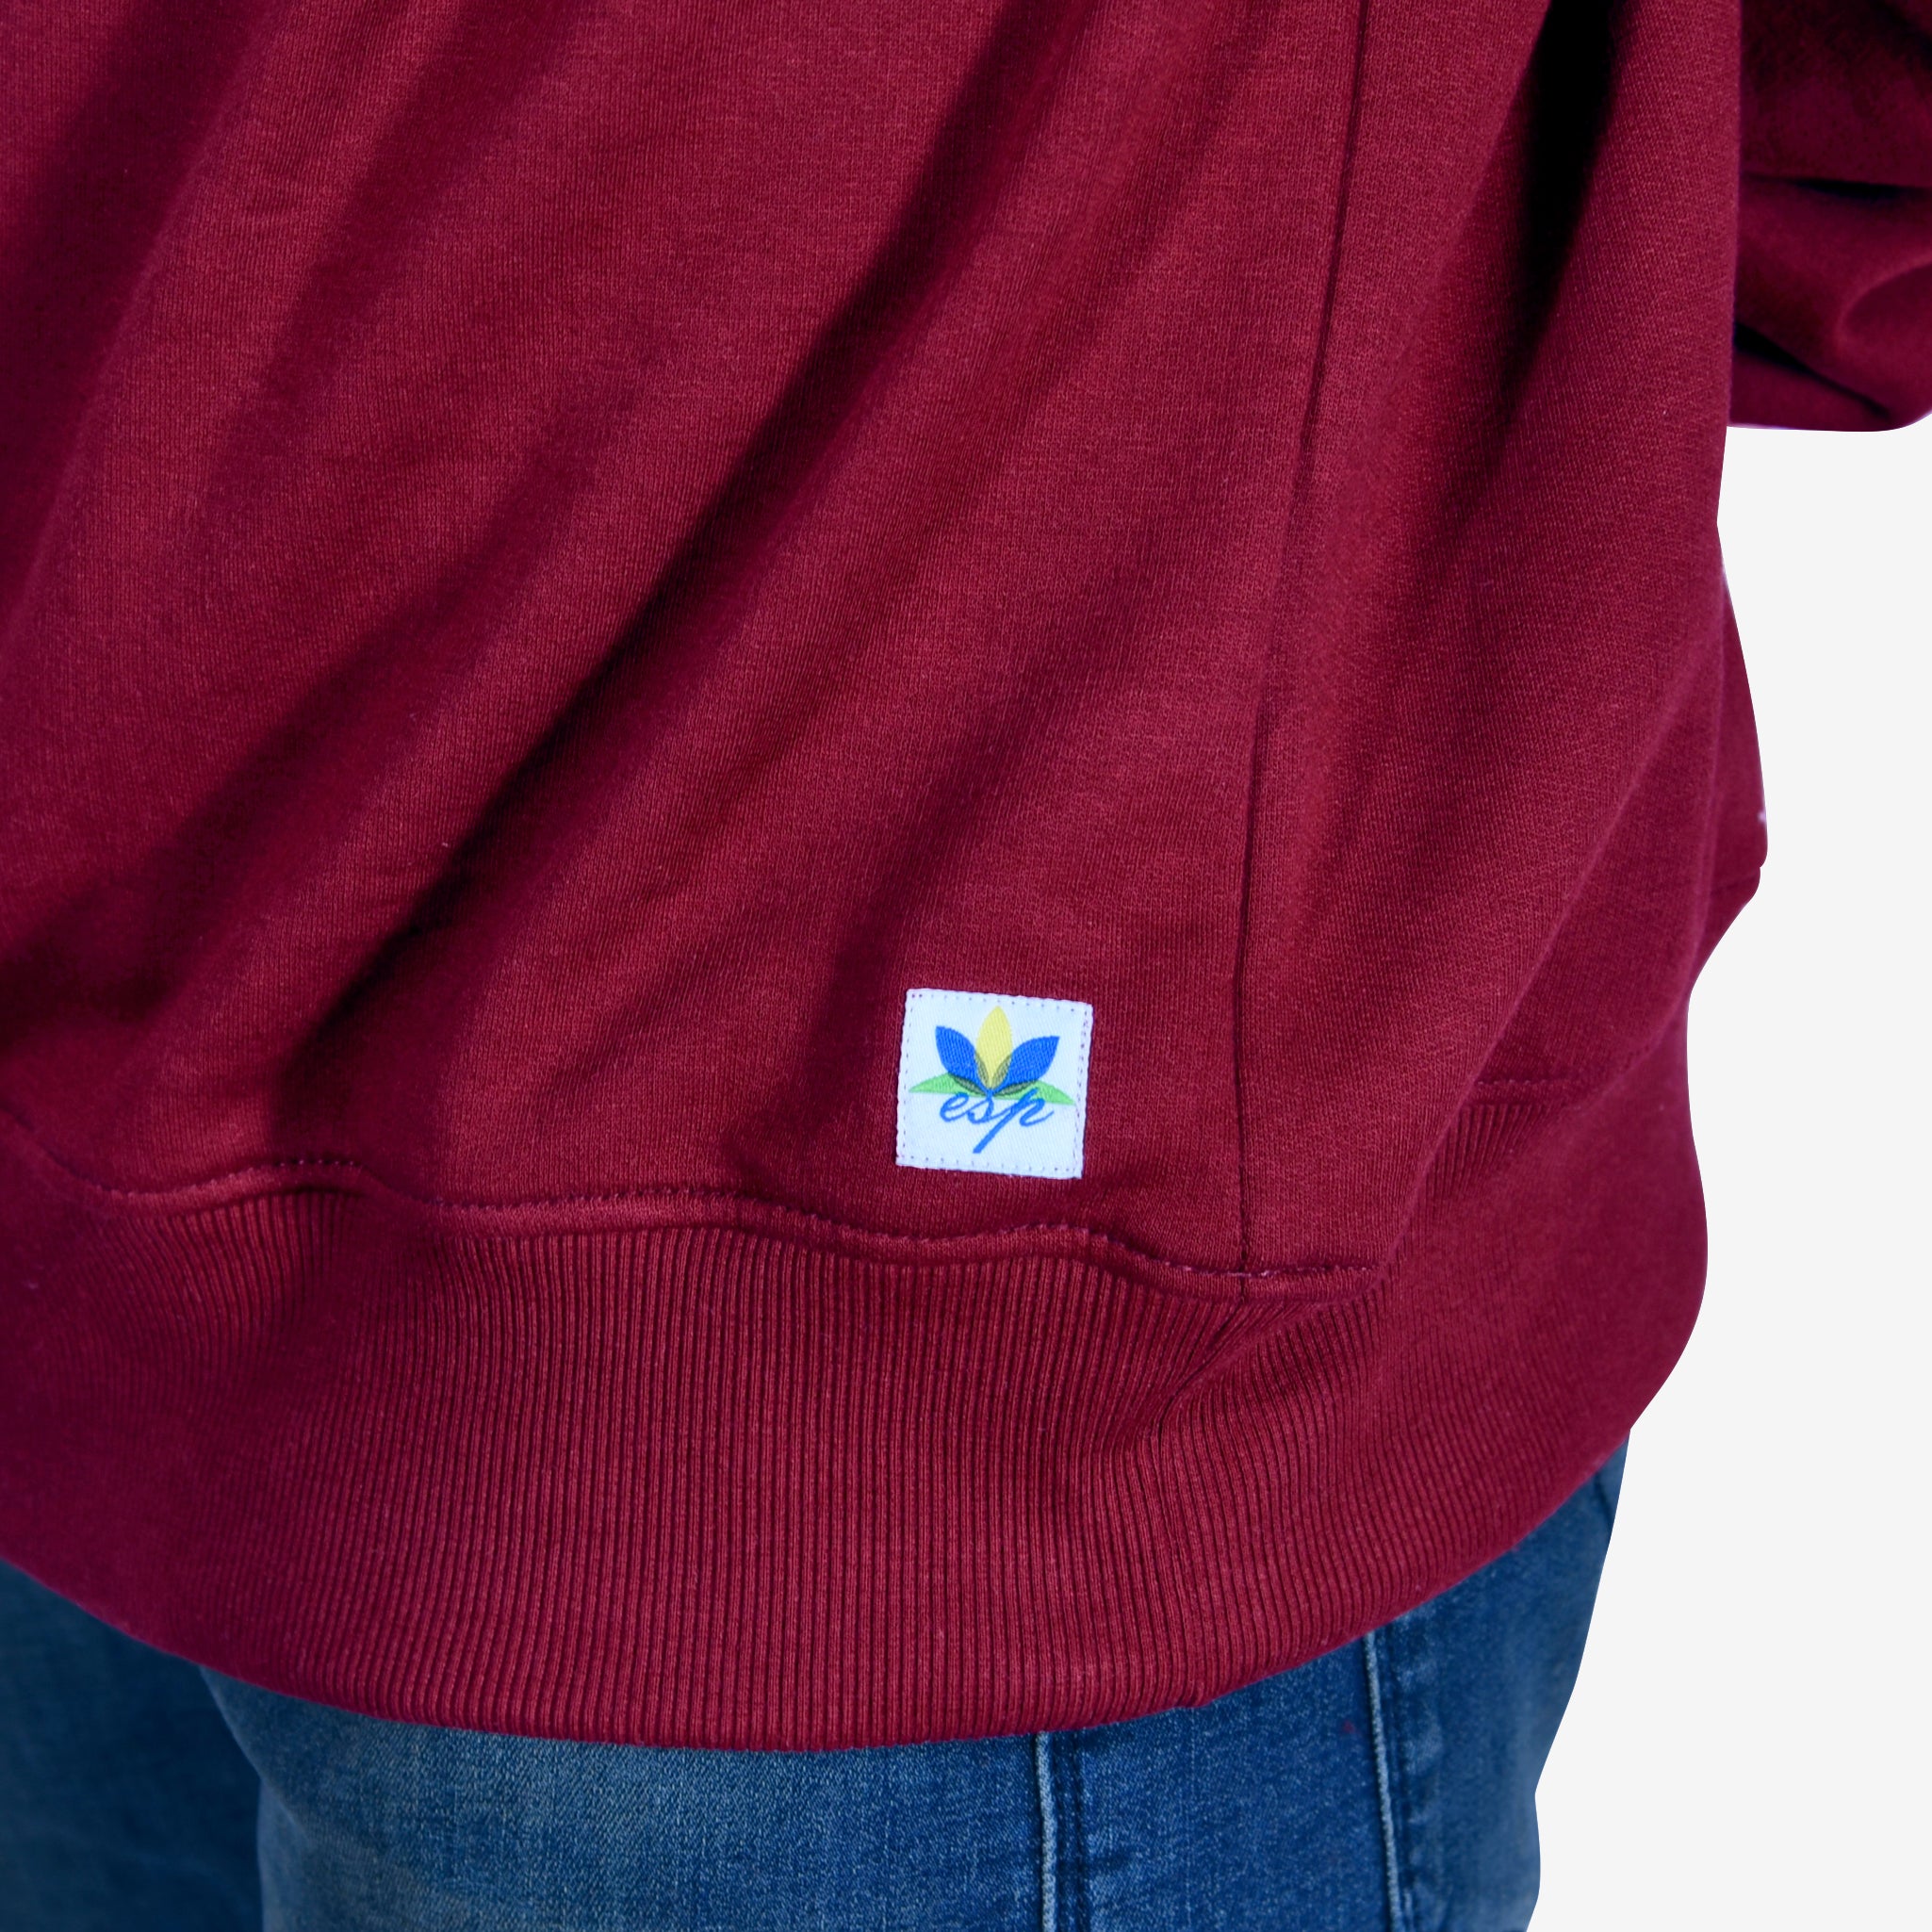 Detailed view of the fabric and fit of an oversized maroon sweatshirt